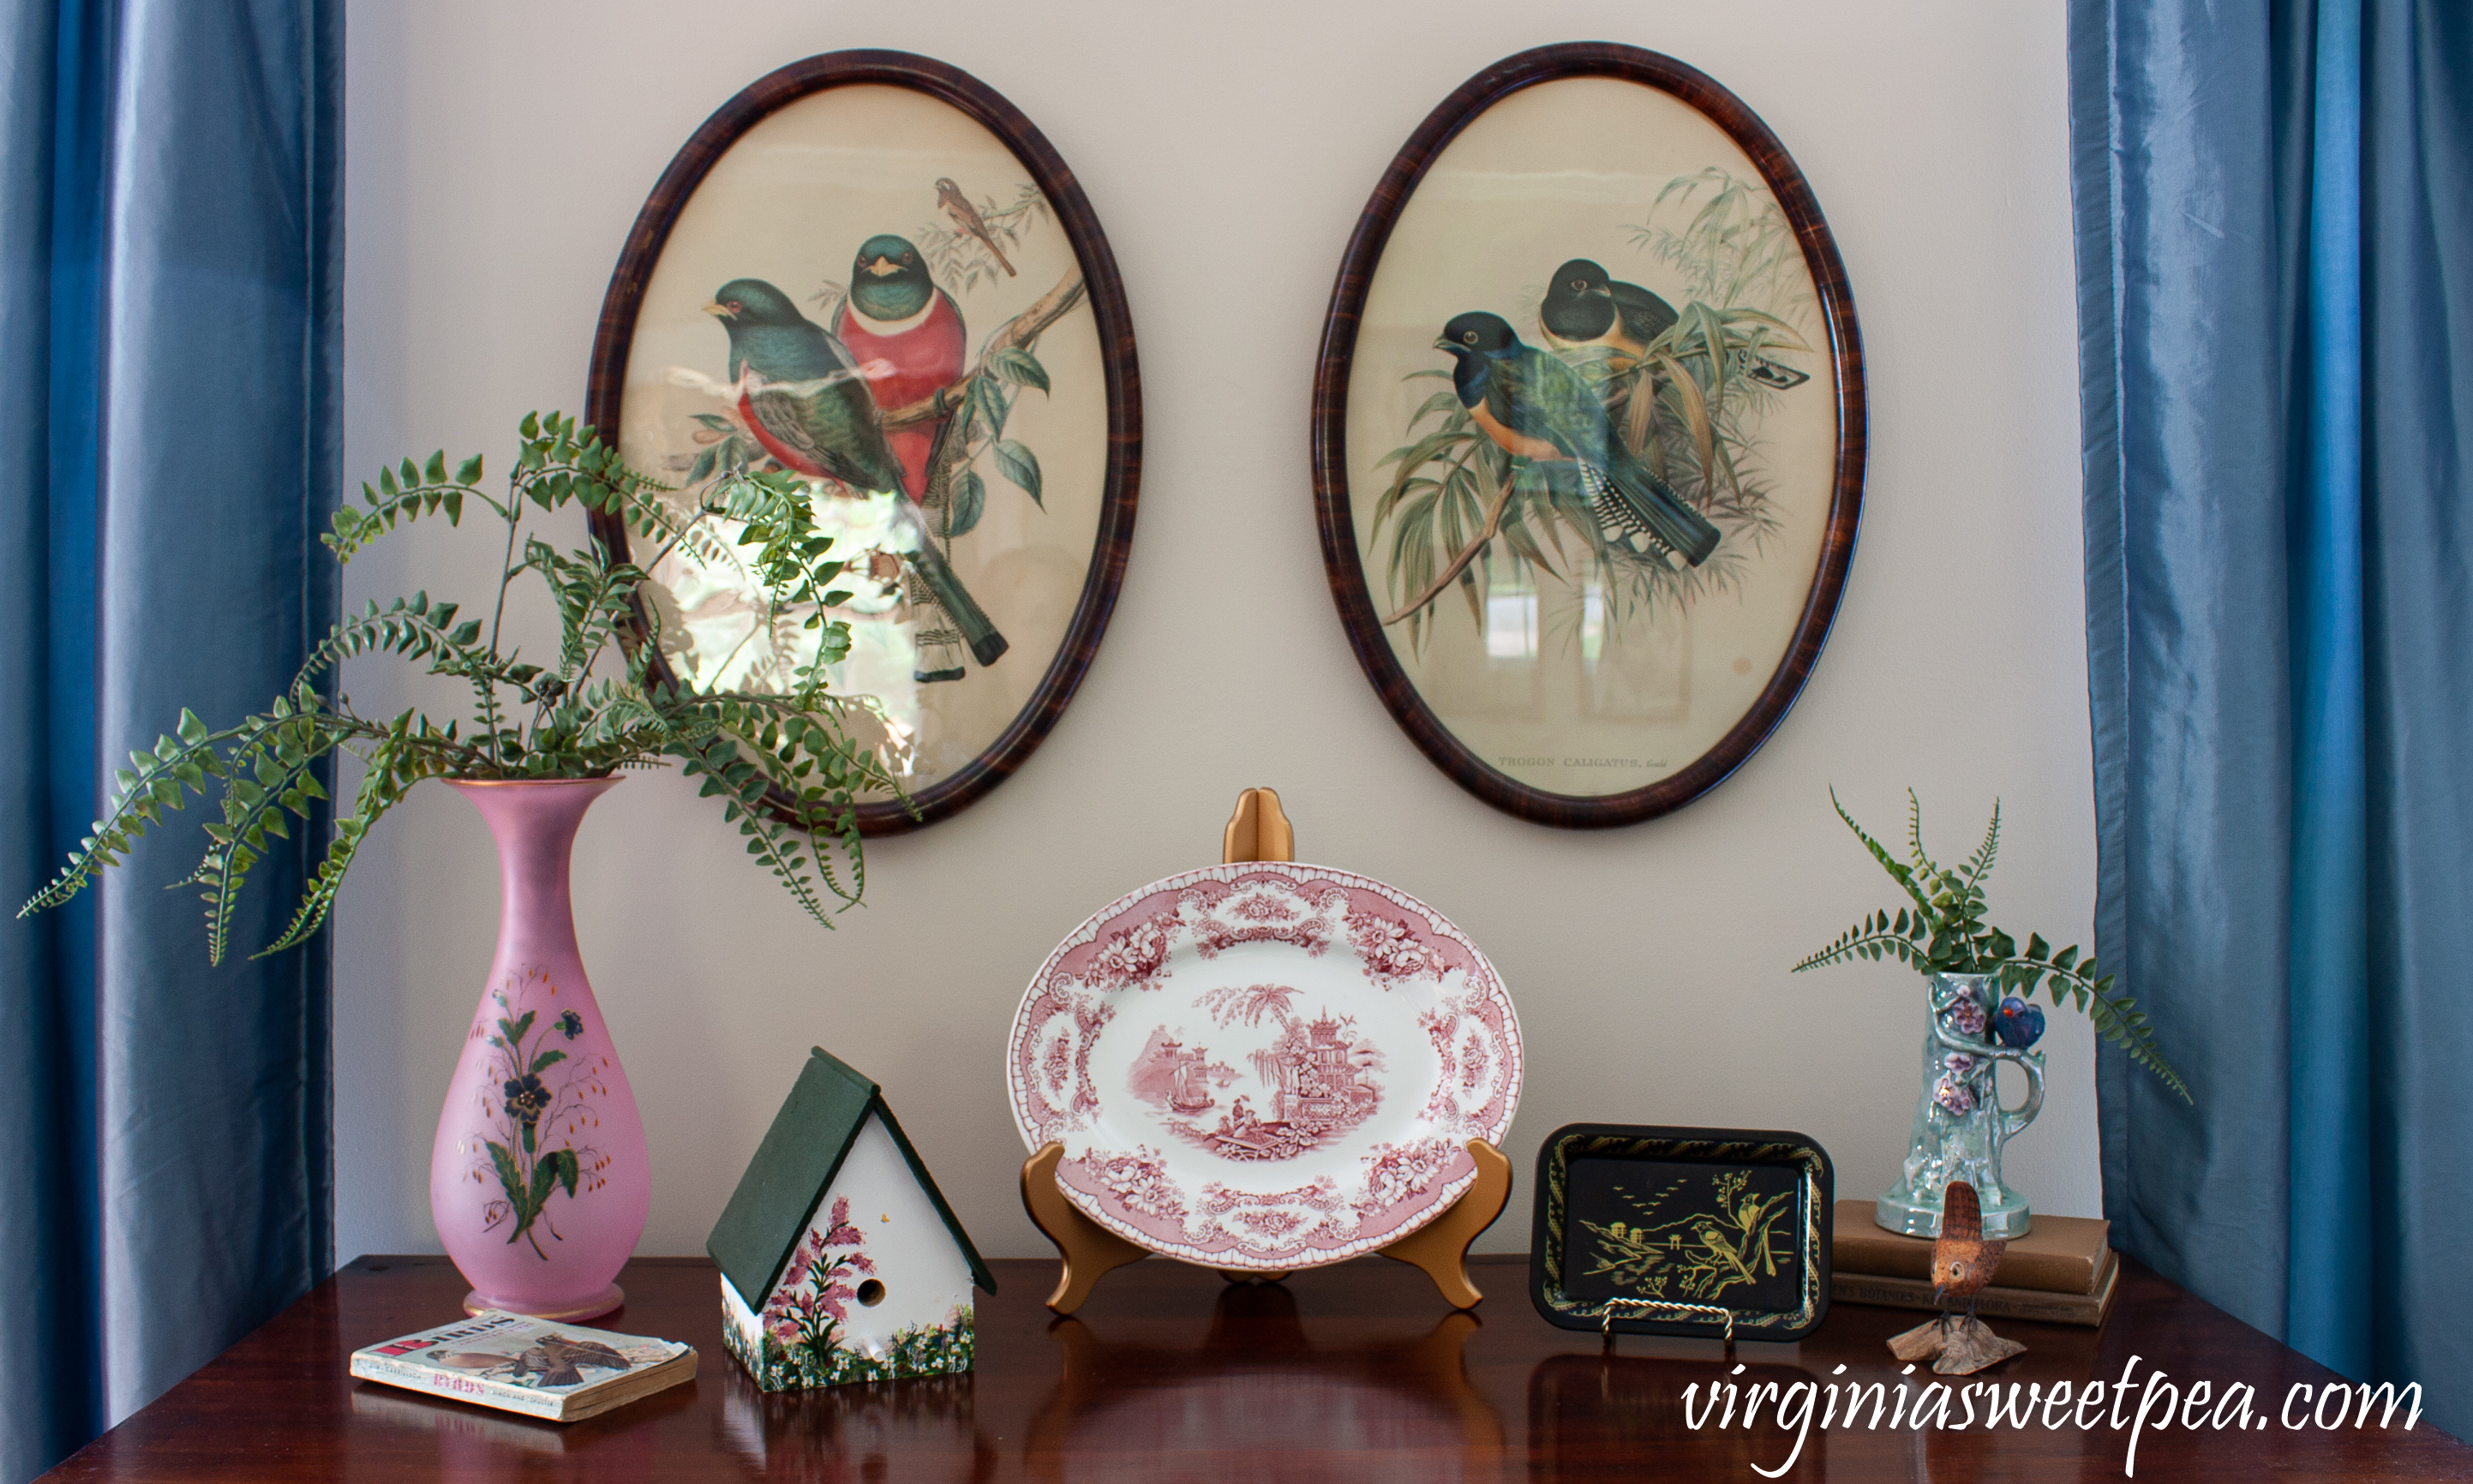 Summer decorating with a bird theme using vintage